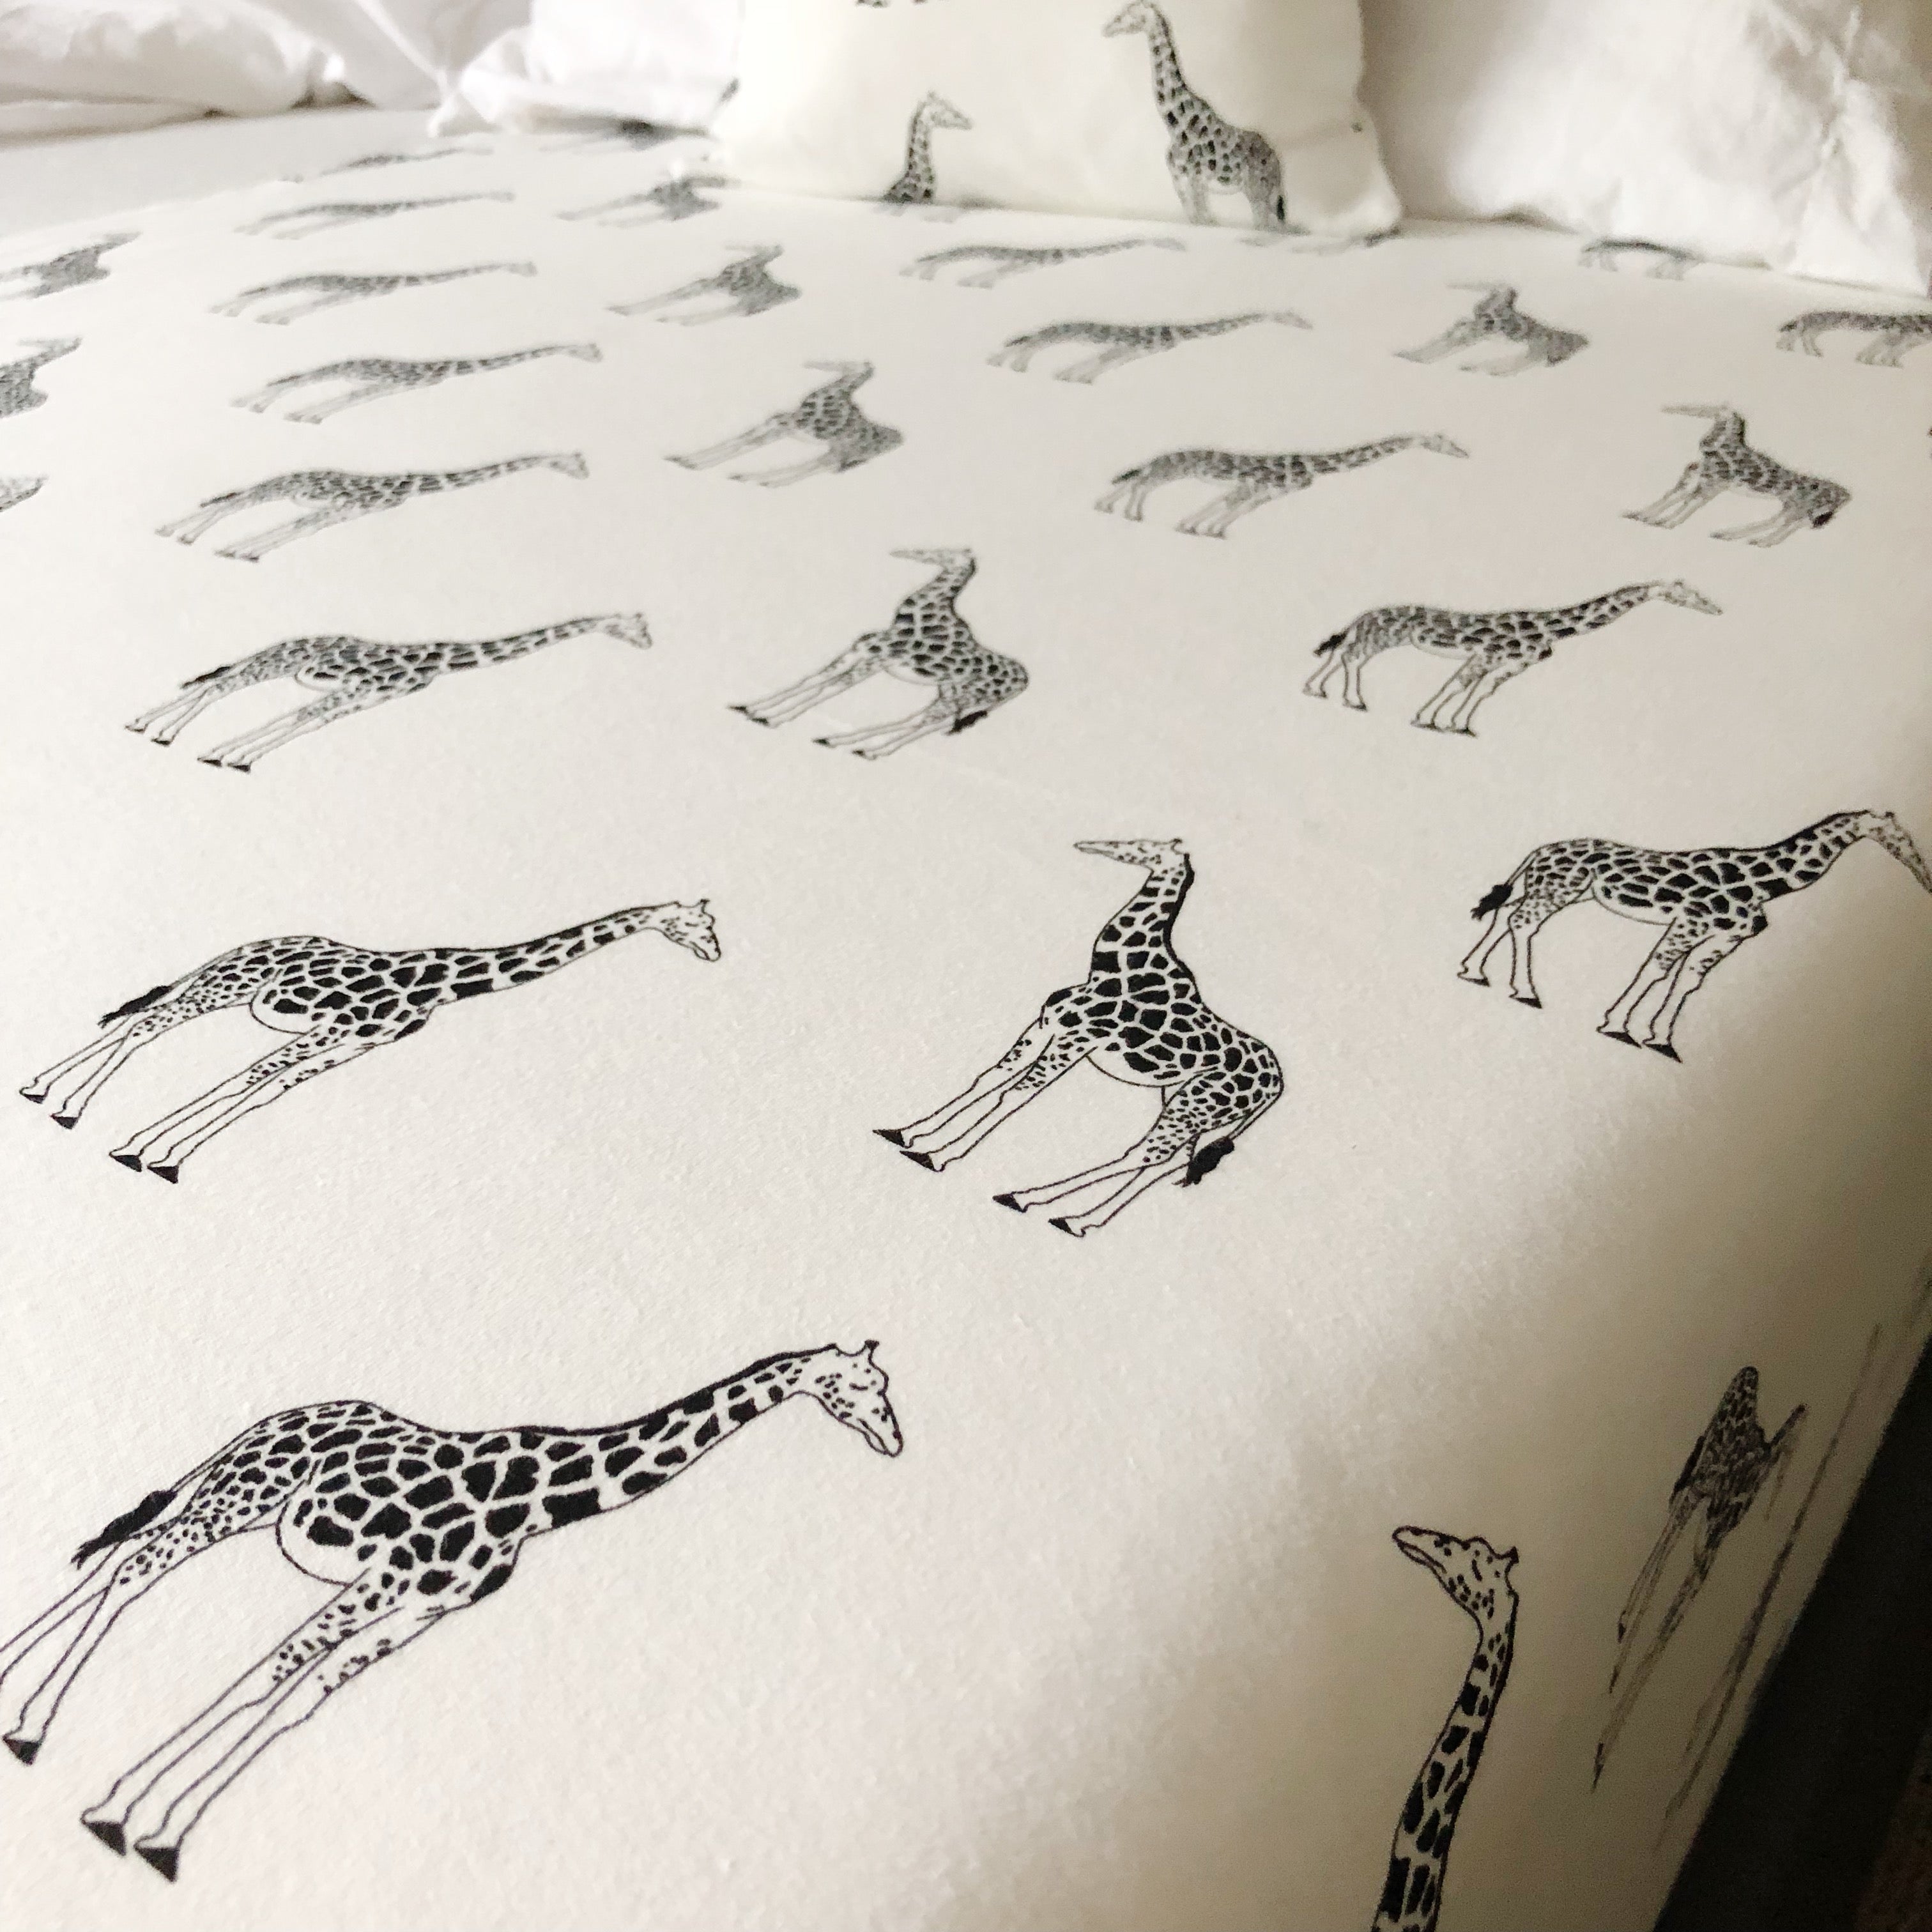 patterned cot bed sheets